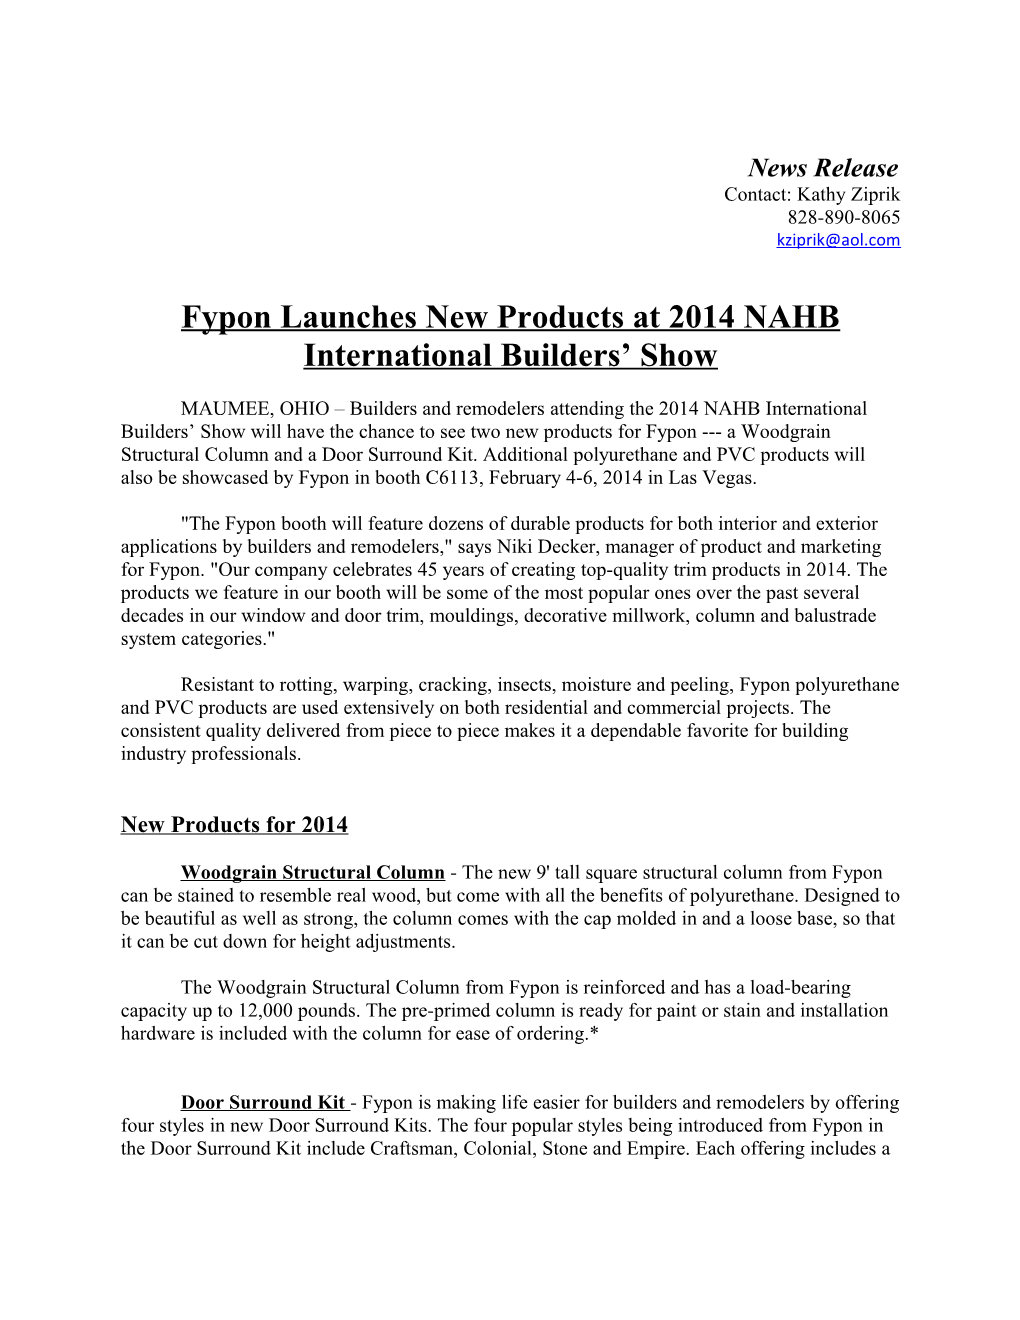 Fypon Launches New Products at 2014 NAHB International Builders Show